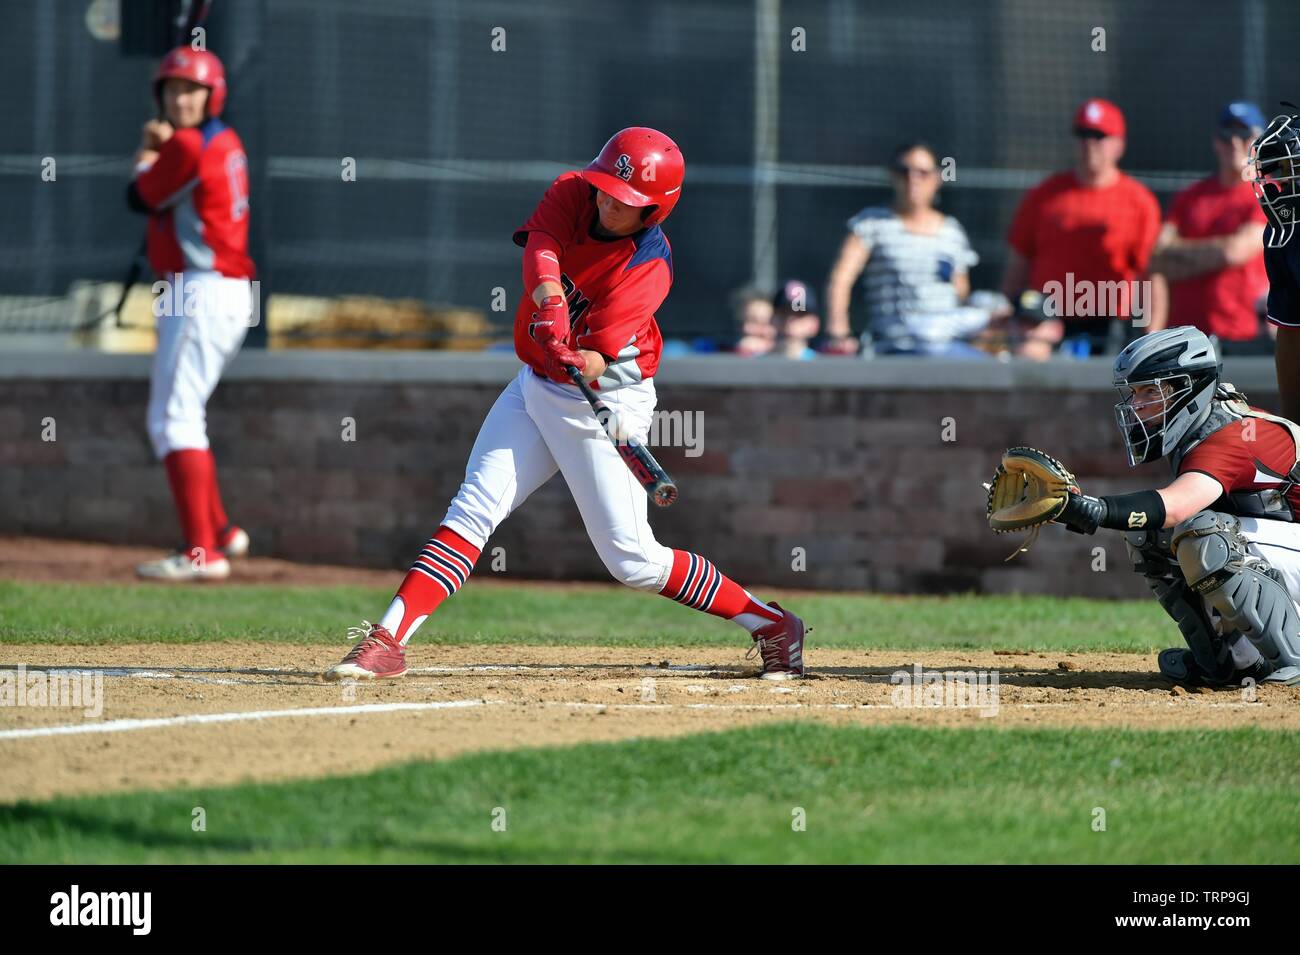 The ball coming off the bat as the hitter doubled to drive in two runs. USA Stock Photo